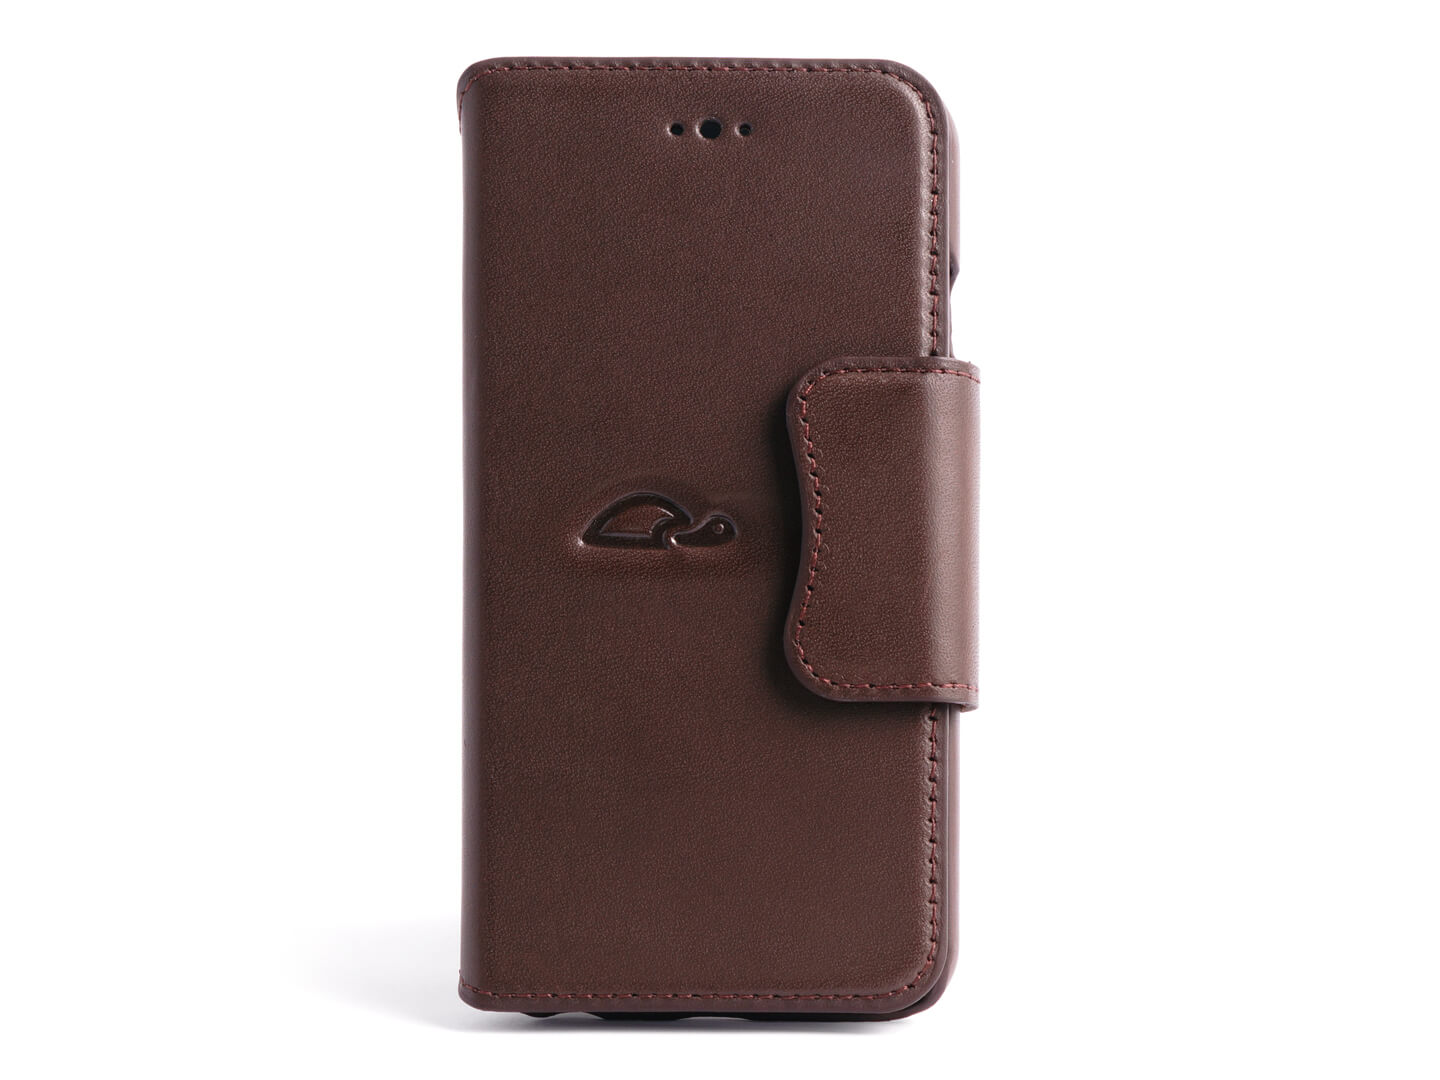 iPhone 6 Leather Wallet Case - With Pocket and Stand function Carapaz